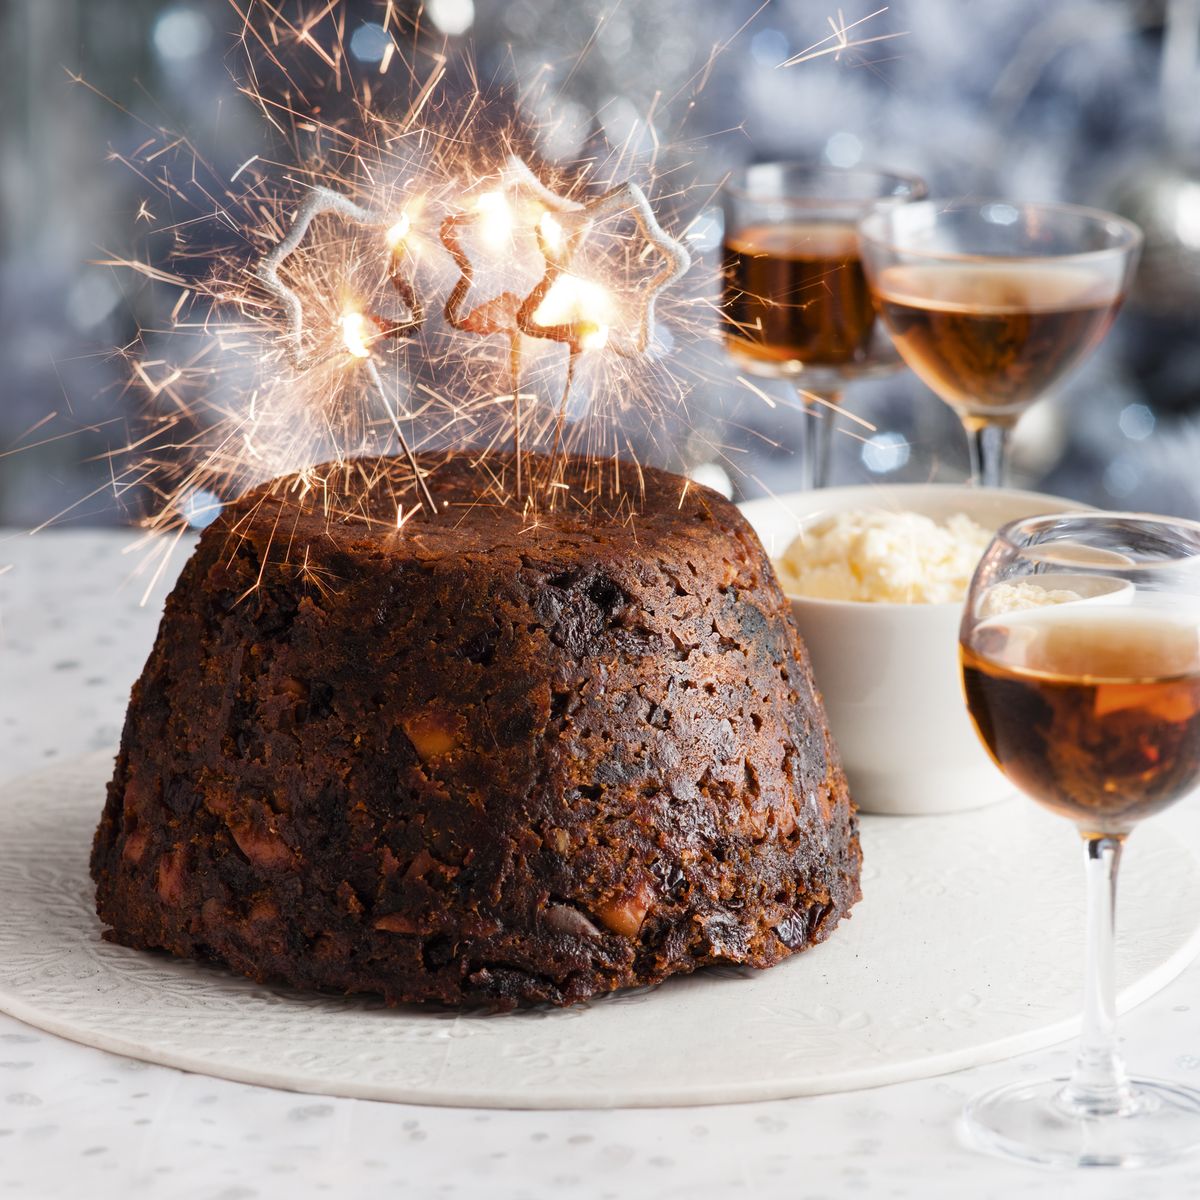 Never buy shop bought Christmas pudding again after trying this easy go-to recipe